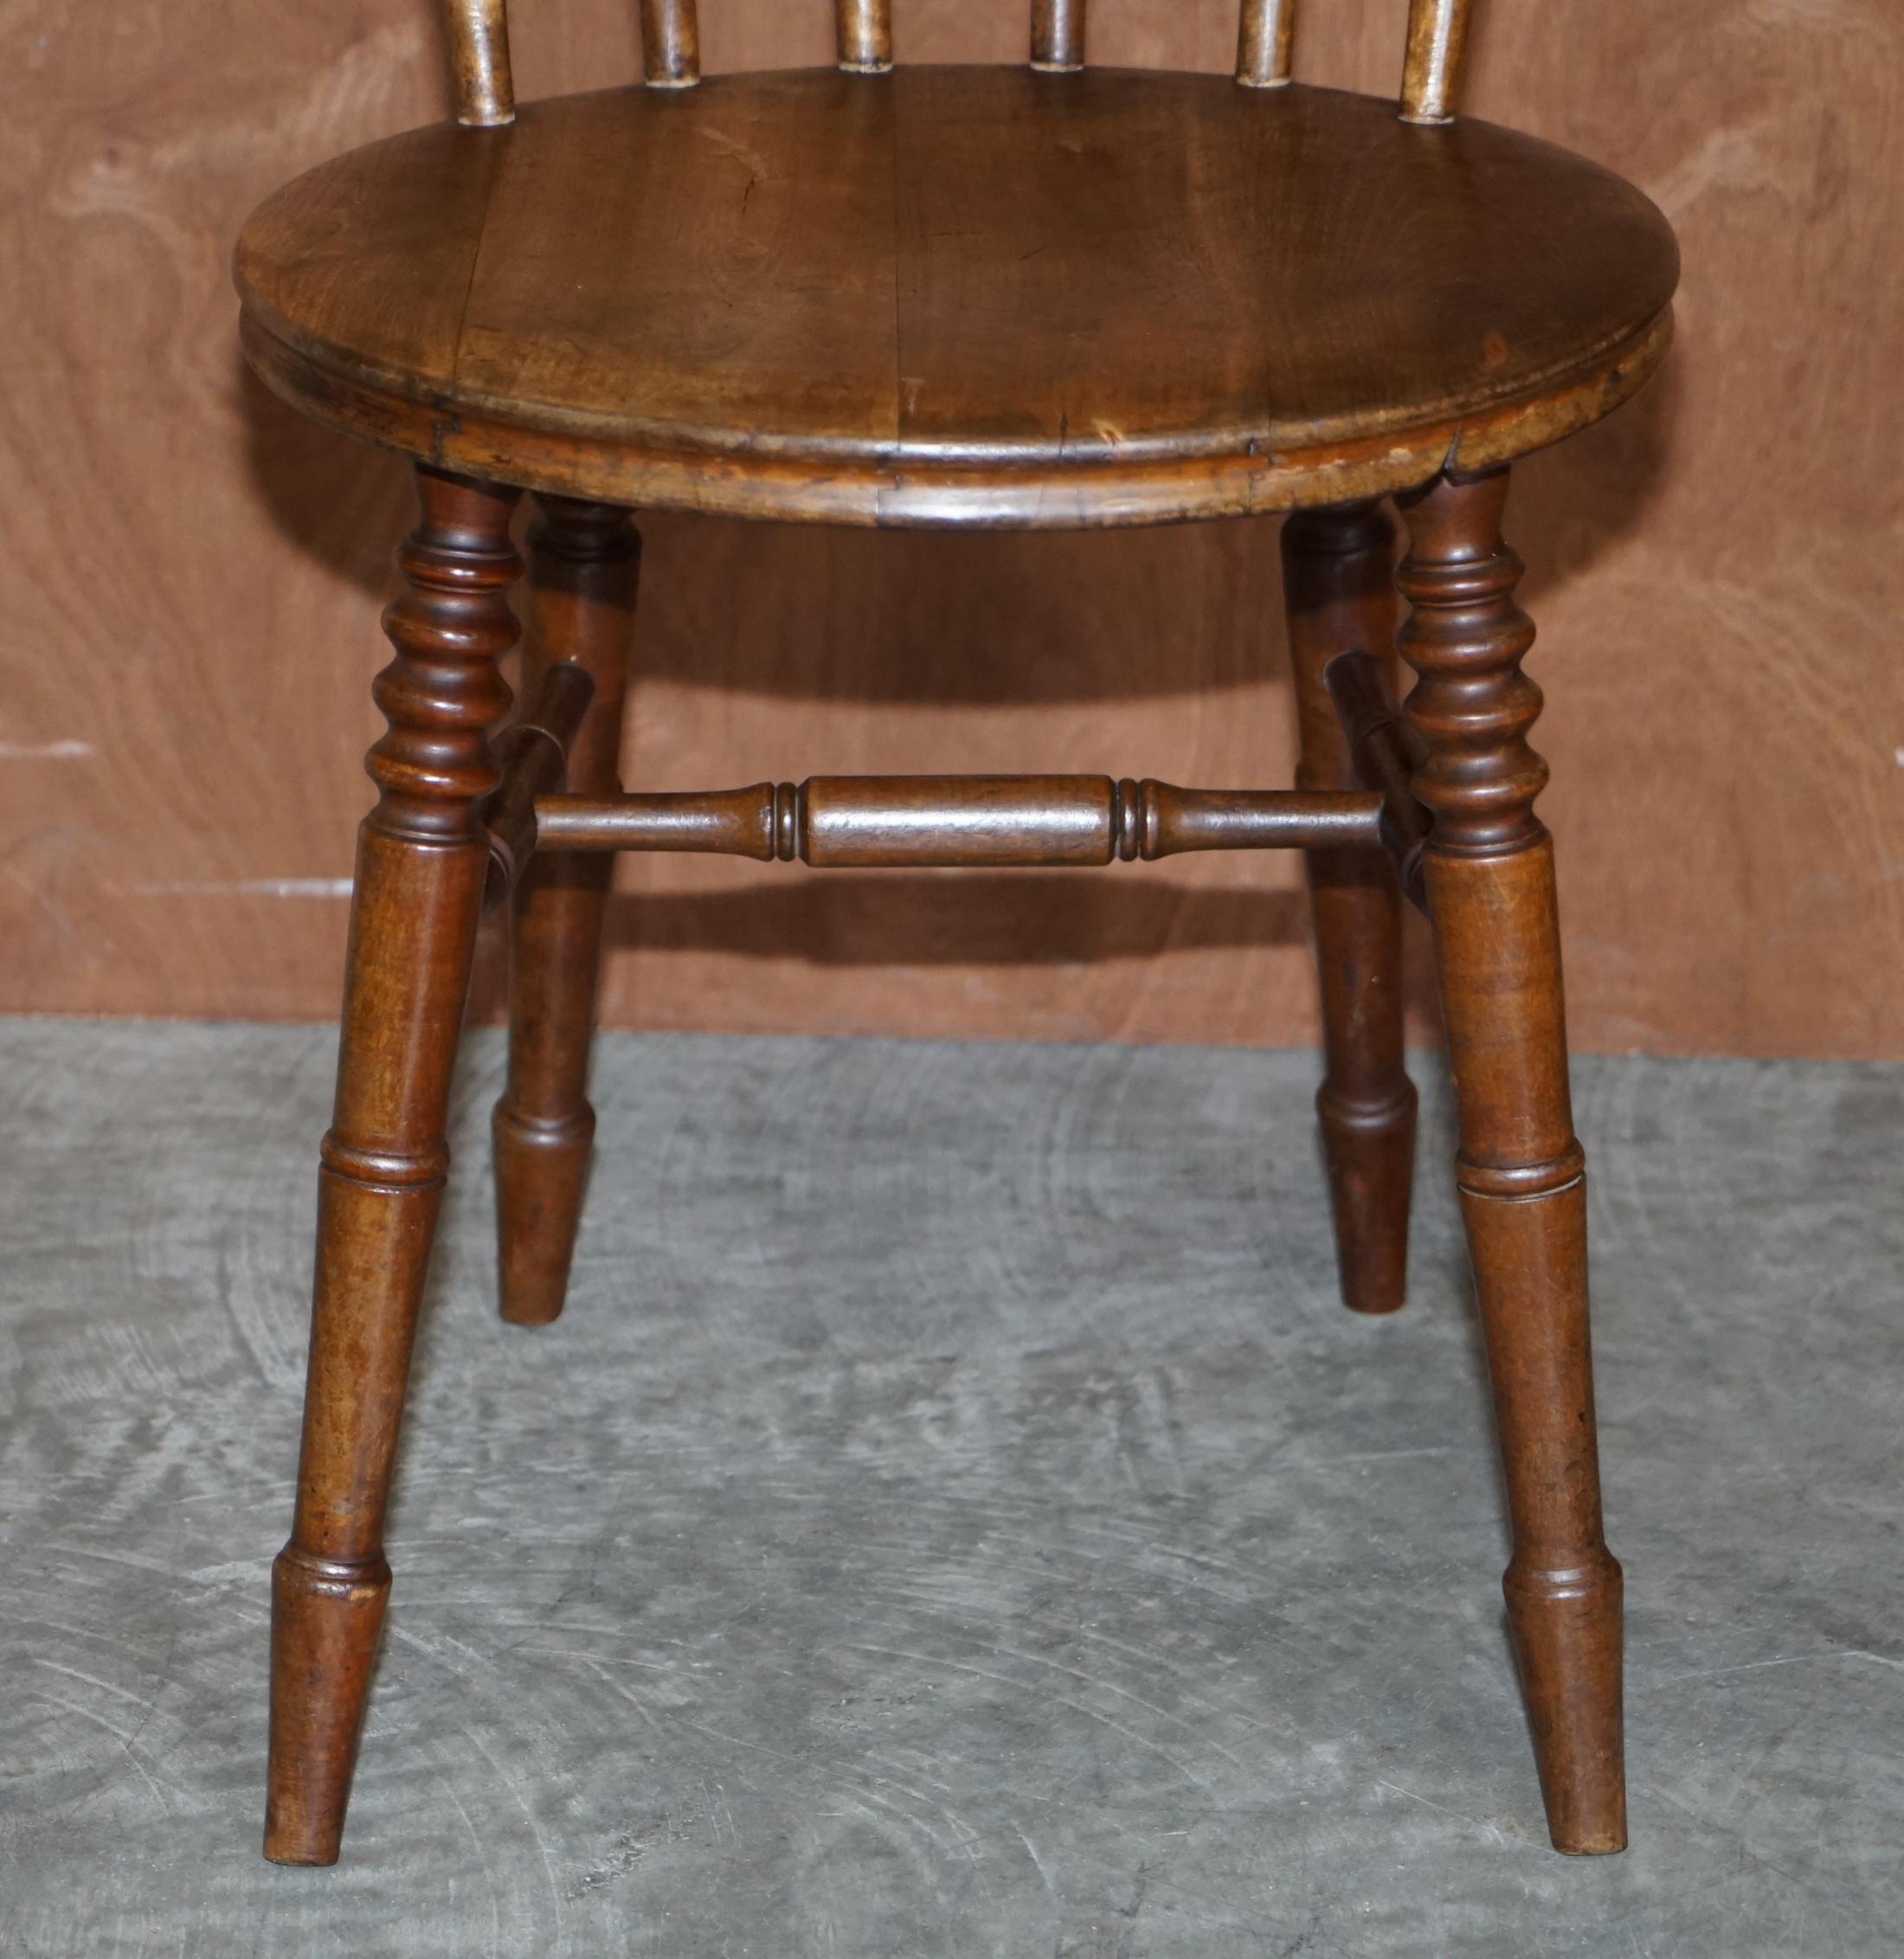 Early 20th Century Antique Pair of Edwardian Walnut Fully Stamped Swedish Ibex Penny Windsor Chairs